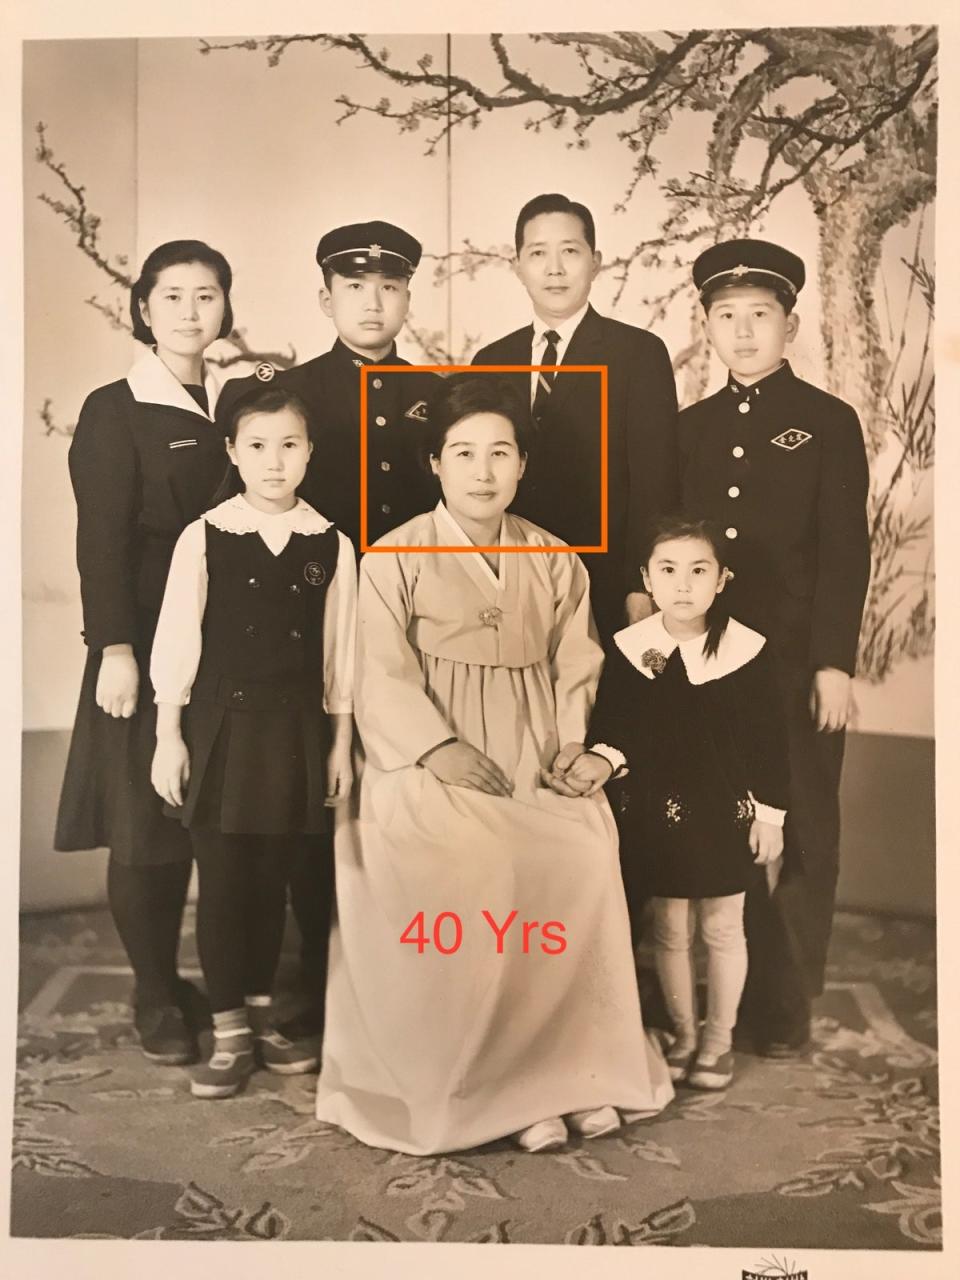 ‘[Ms Kim] wanted her passing to be celebrated in the Presbyterian Church in Leonia, [New Jersey],’ Mr Maggiano said (Kummi Kim)